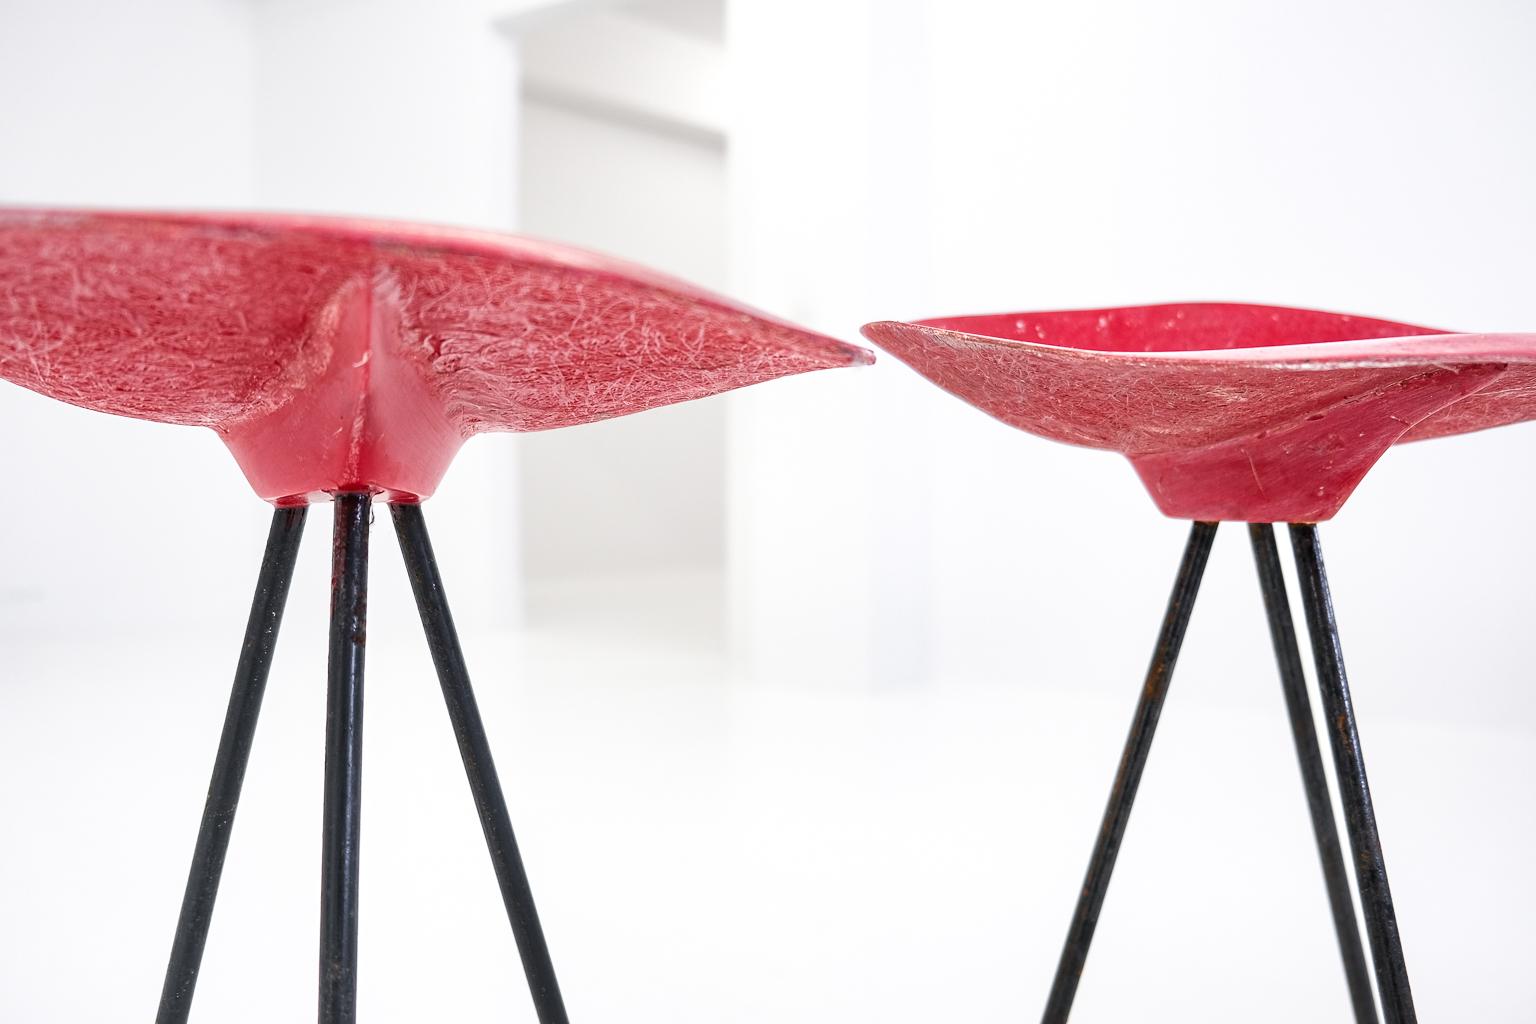 A Pair of tripod stool by Jean Raymond Picard/Jean-René Picard for S.E.T.A. For Sale 7